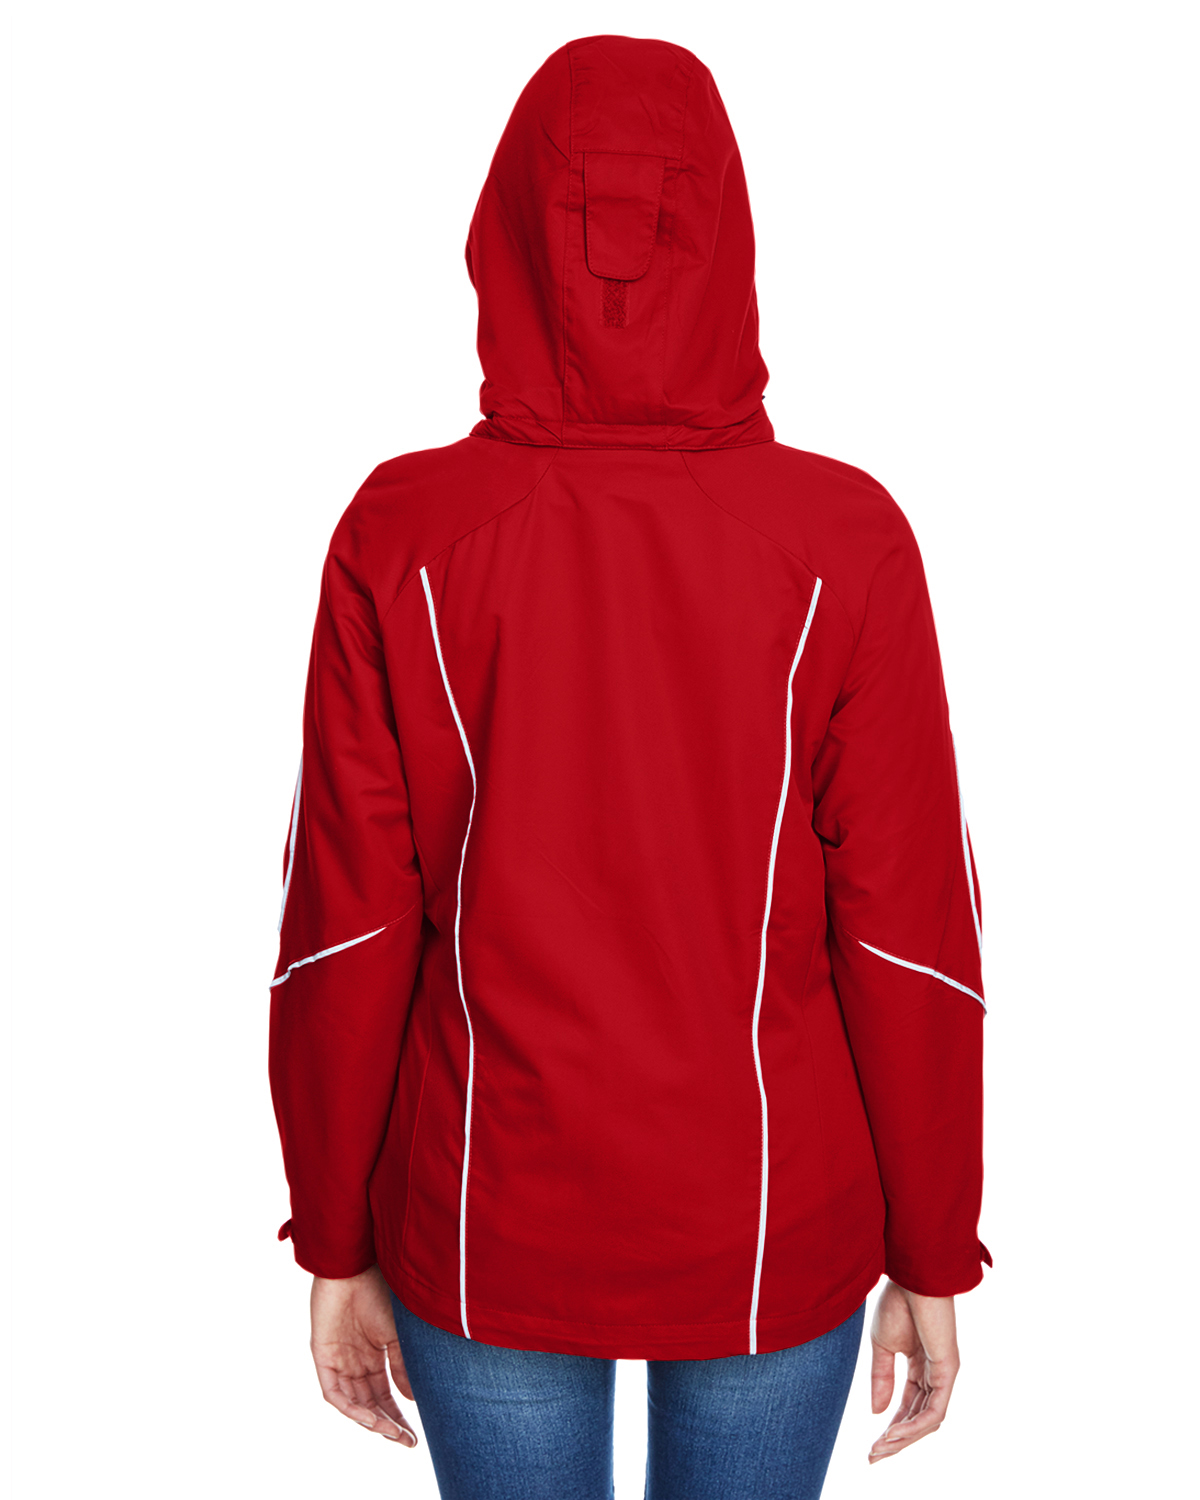 Ladies' Angle 3-in-1 Jacket with Bonded Fleece Liner - CLASSIC RED - S - image 2 of 3